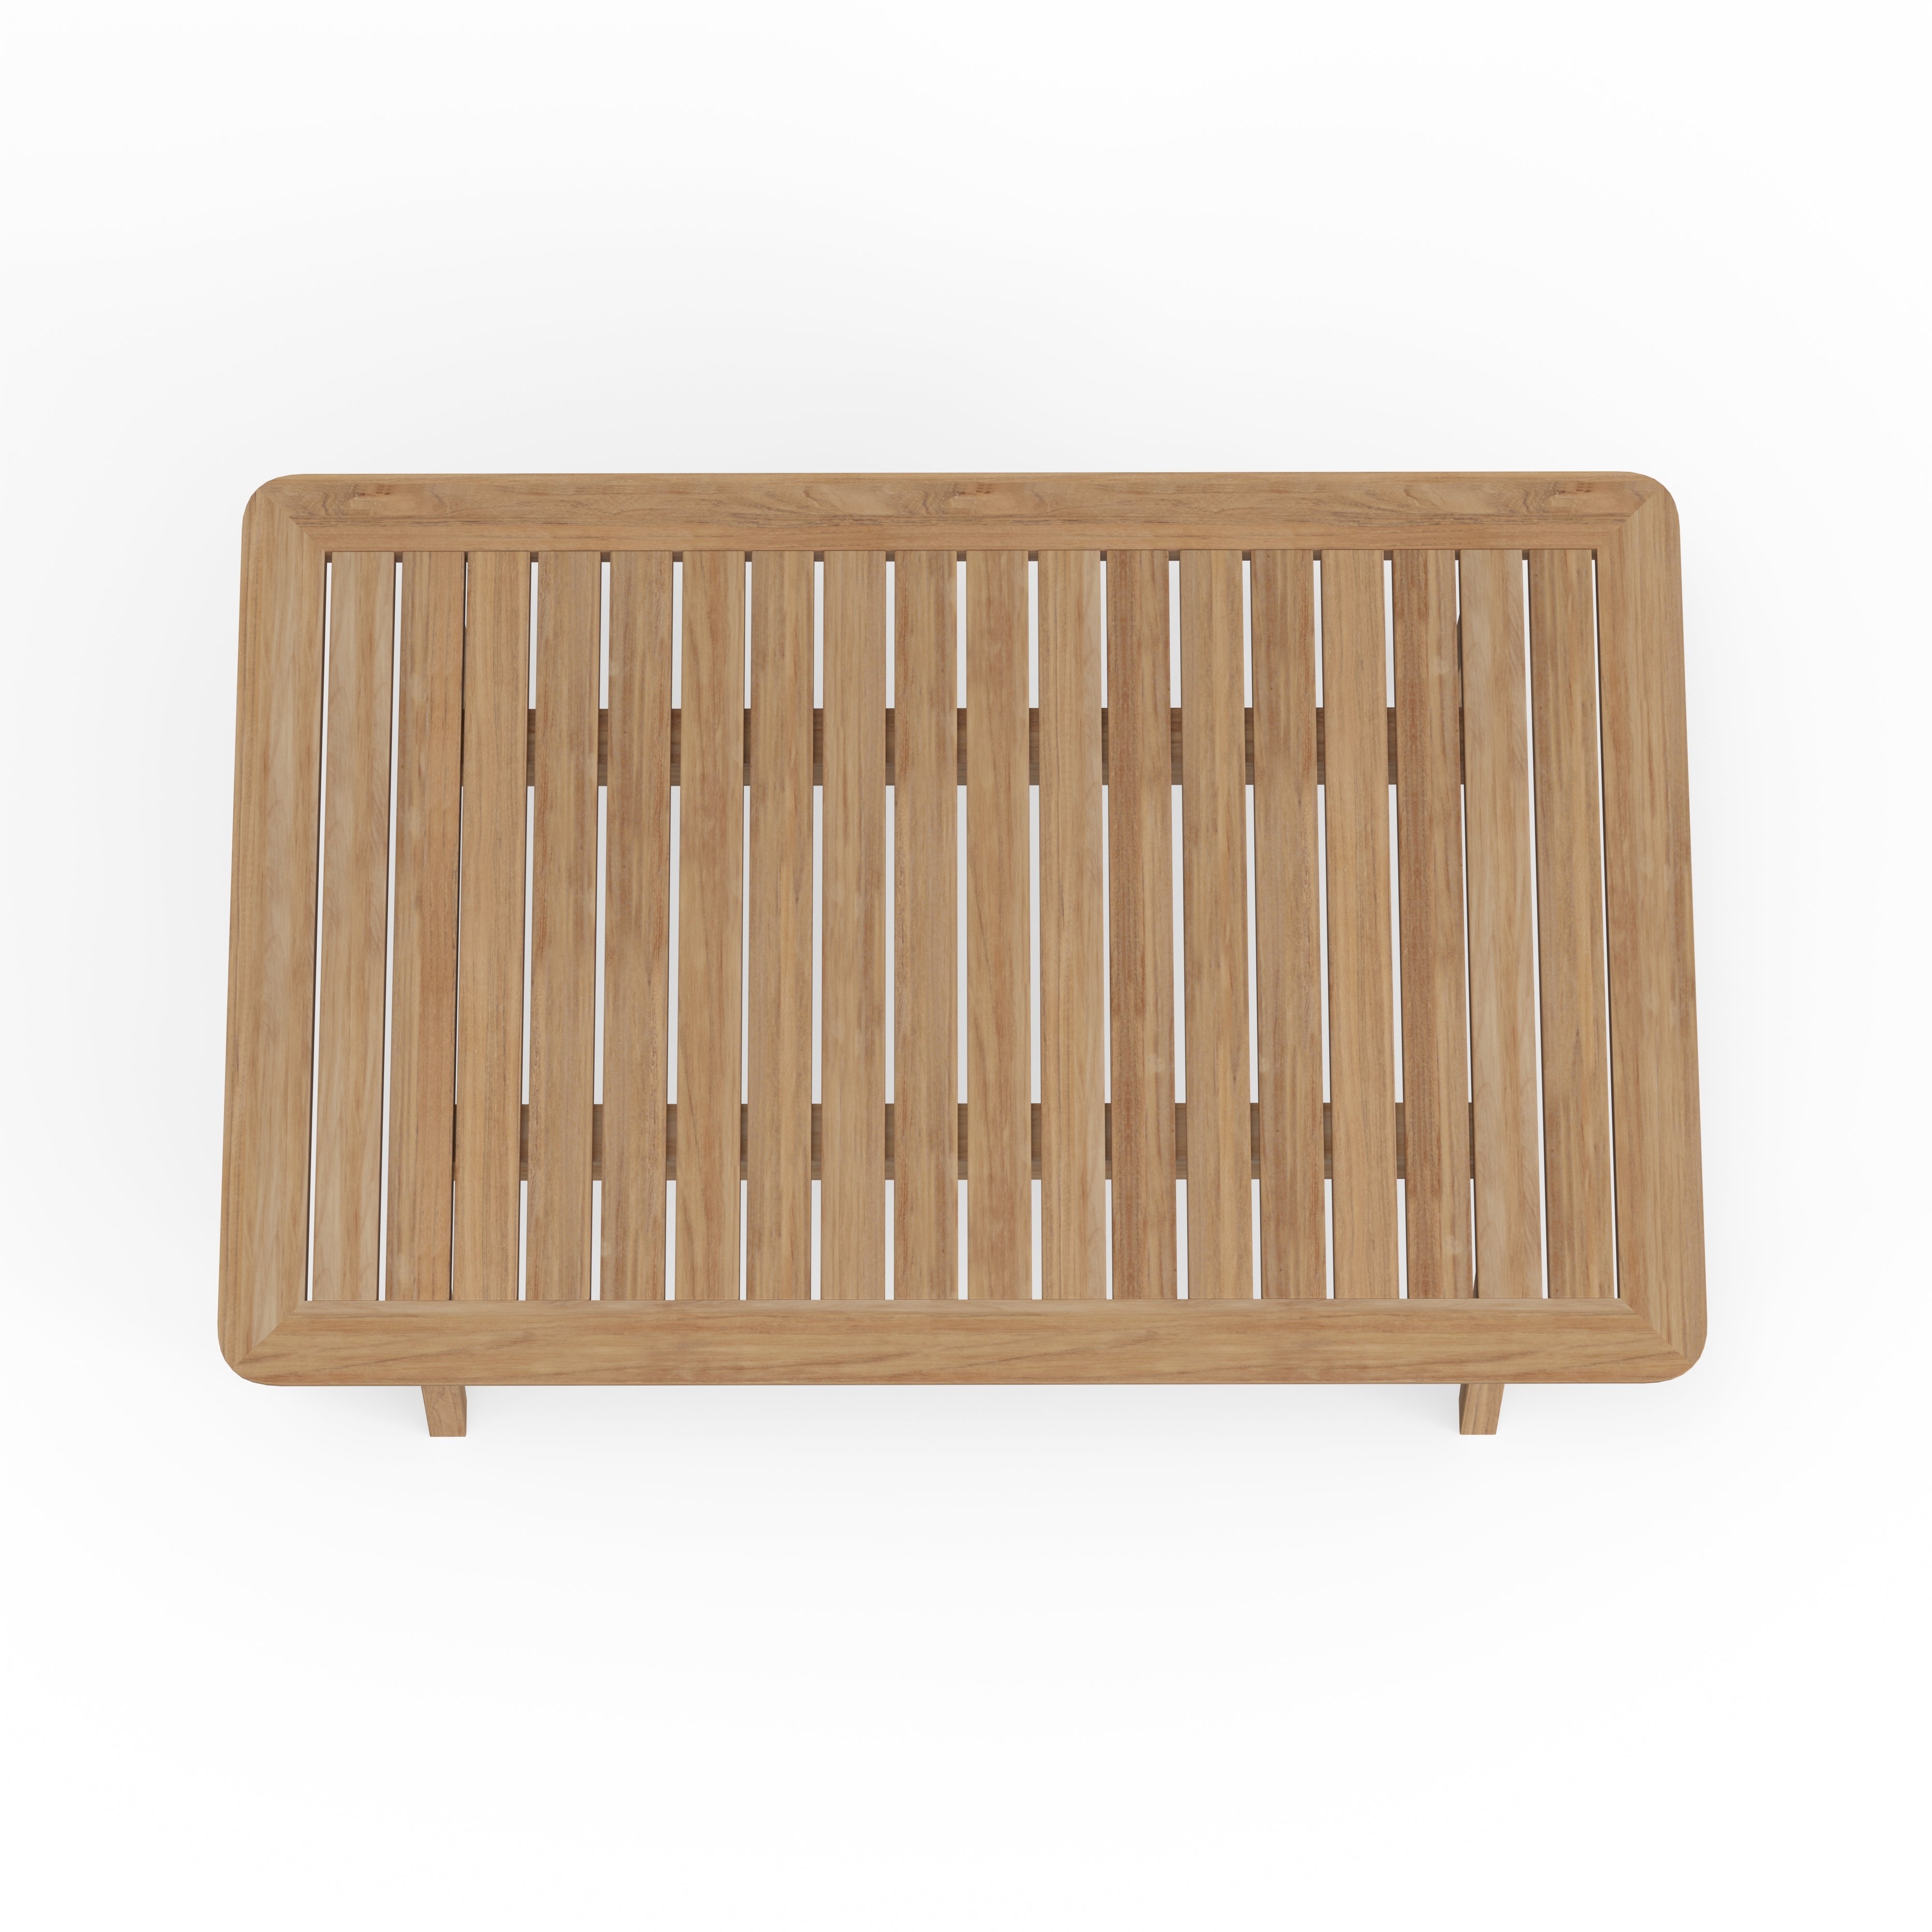  Most Durable Outdoor Coffee Table